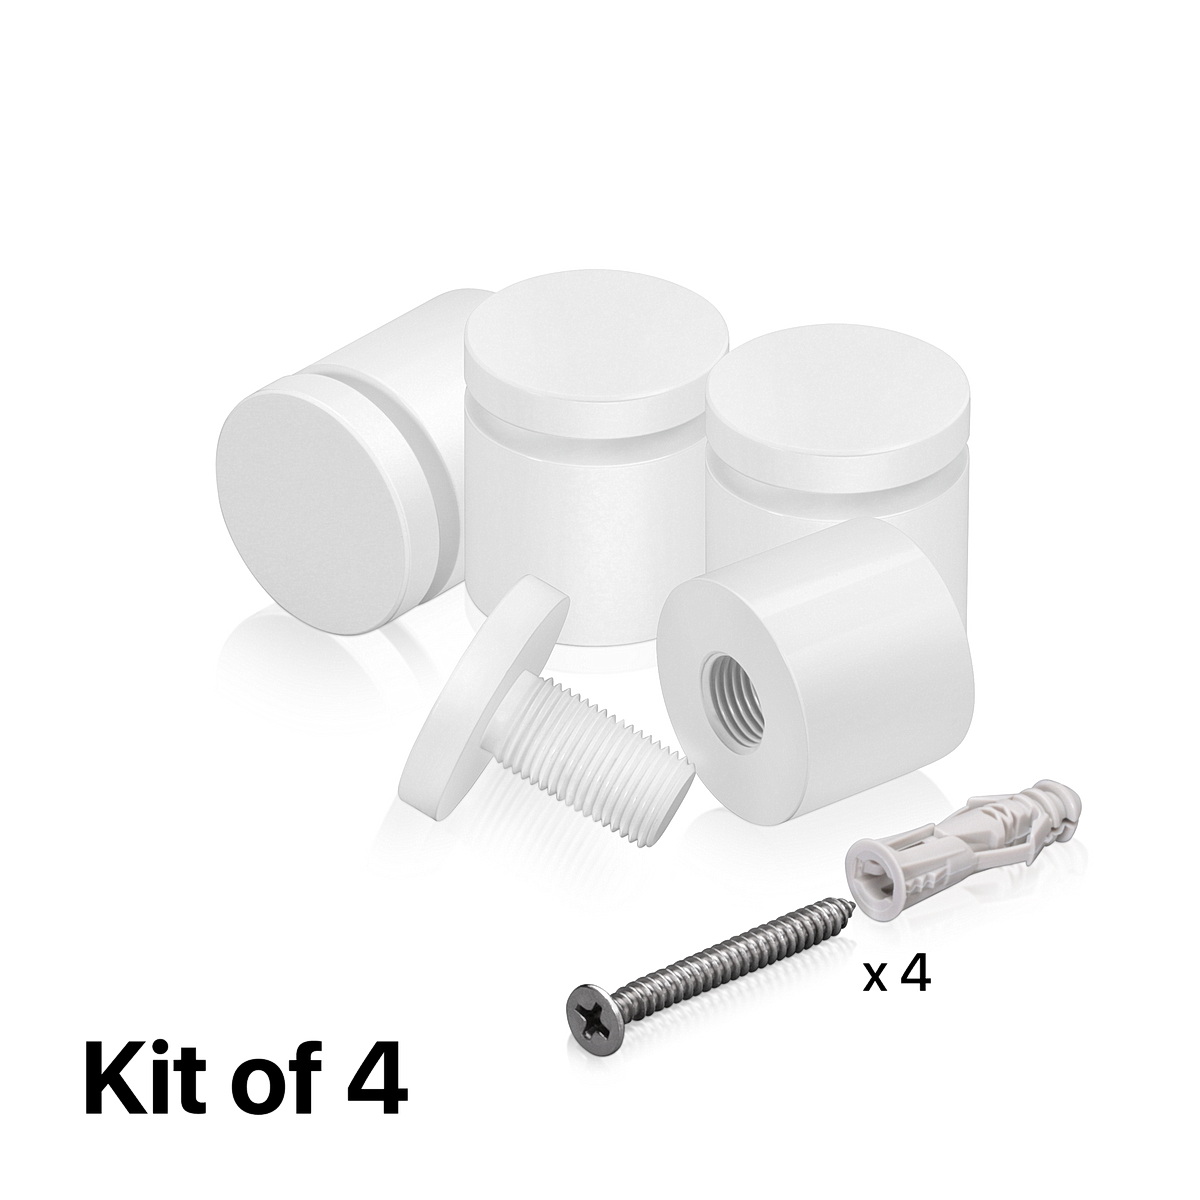 (Set of 4) 1'' Diameter X 3/4'' Barrel Length, Affordable Aluminum Standoffs, White Coated Finish Standoff and (4) 2216Z Screws and (4) LANC1 Anchors for concrete/drywall (For Inside/Outside) [Required Material Hole Size: 7/16'']